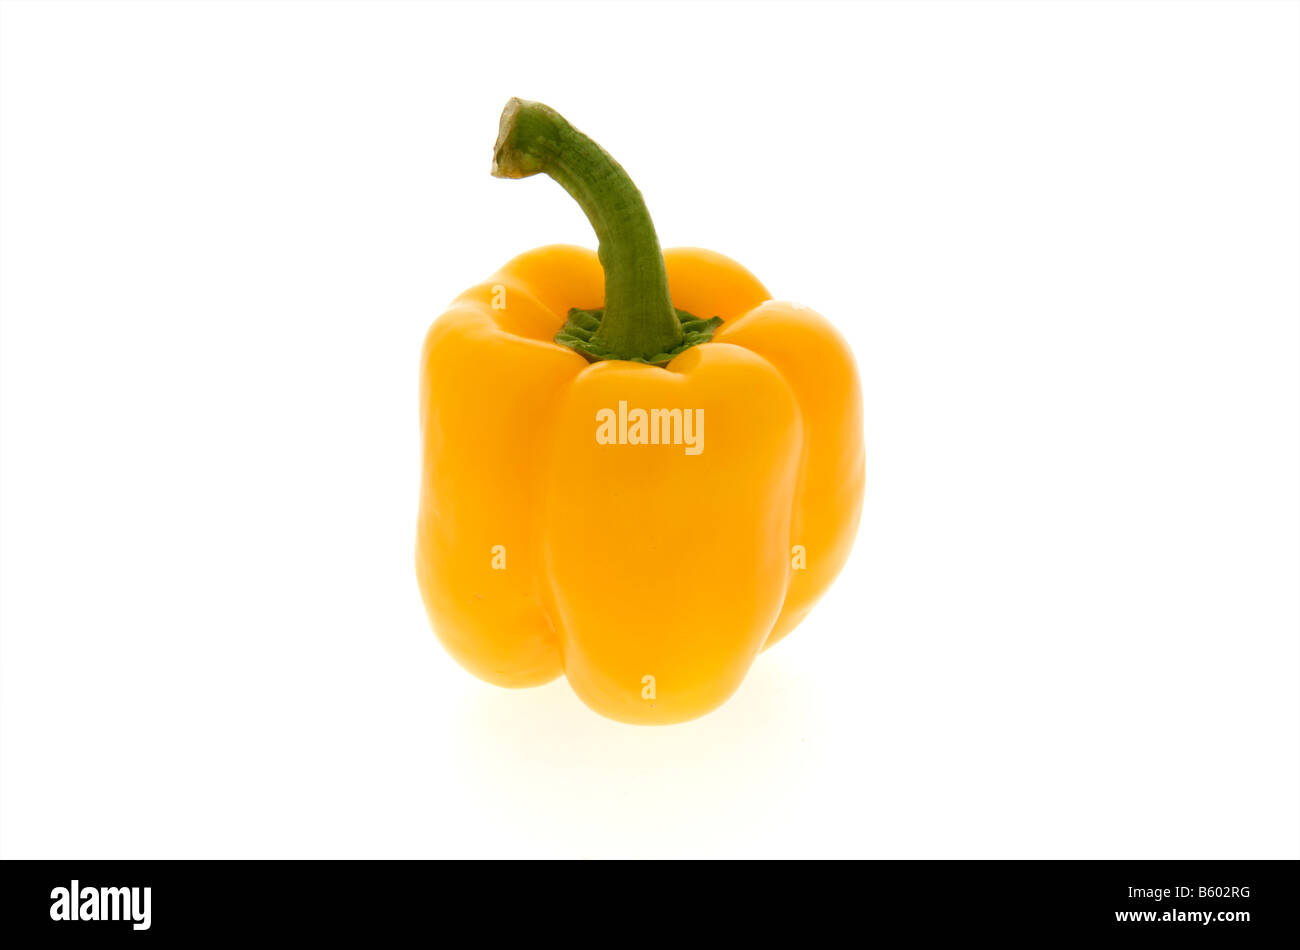 yellow pepper against a white background Stock Photo